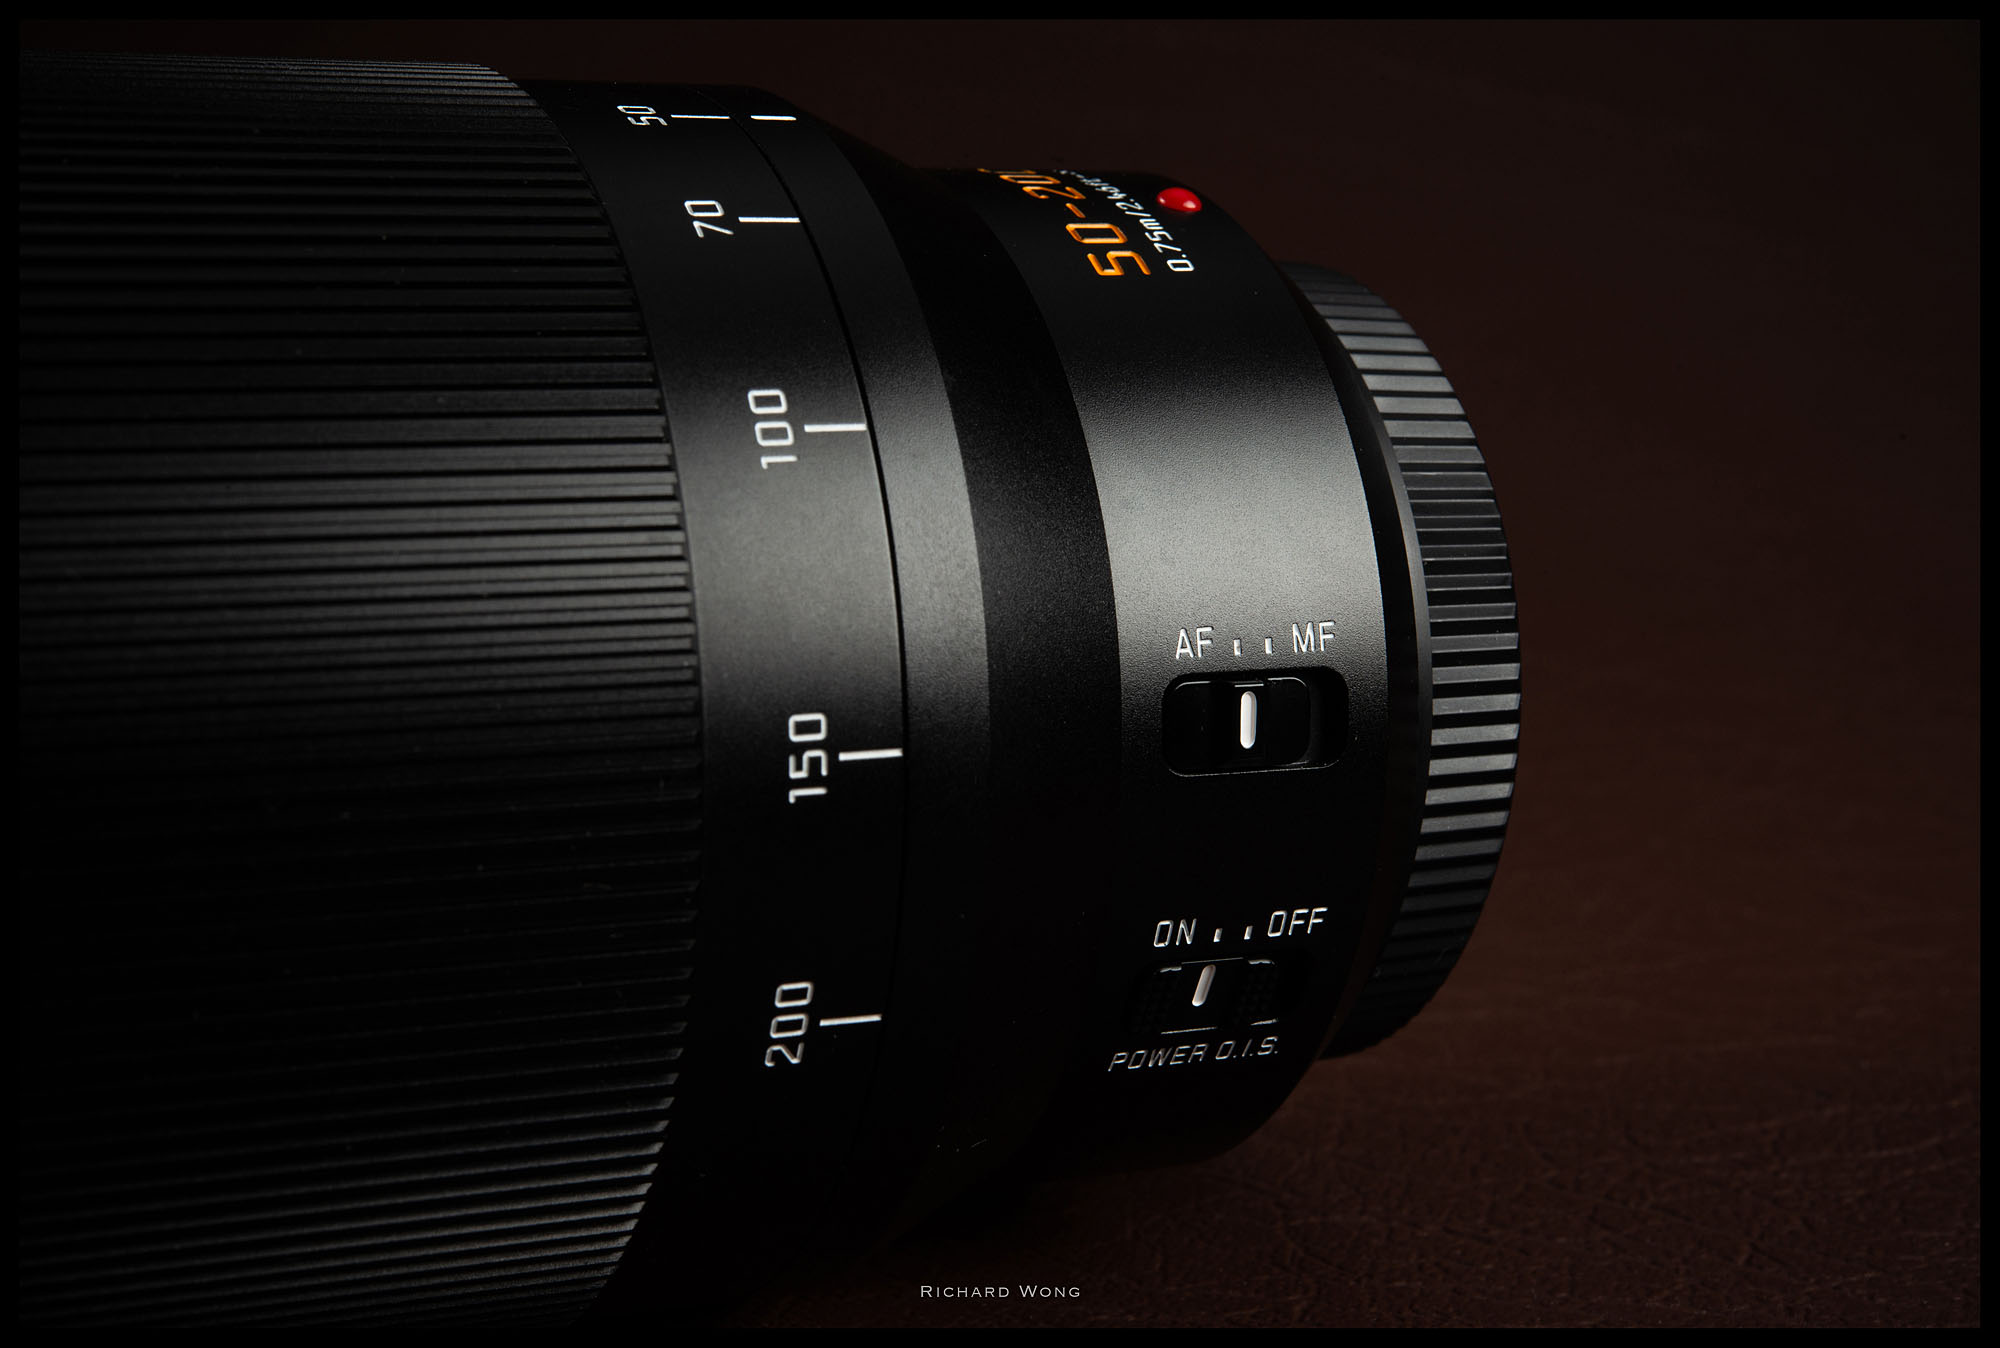 Leica 50-200mm f2.8-4 review